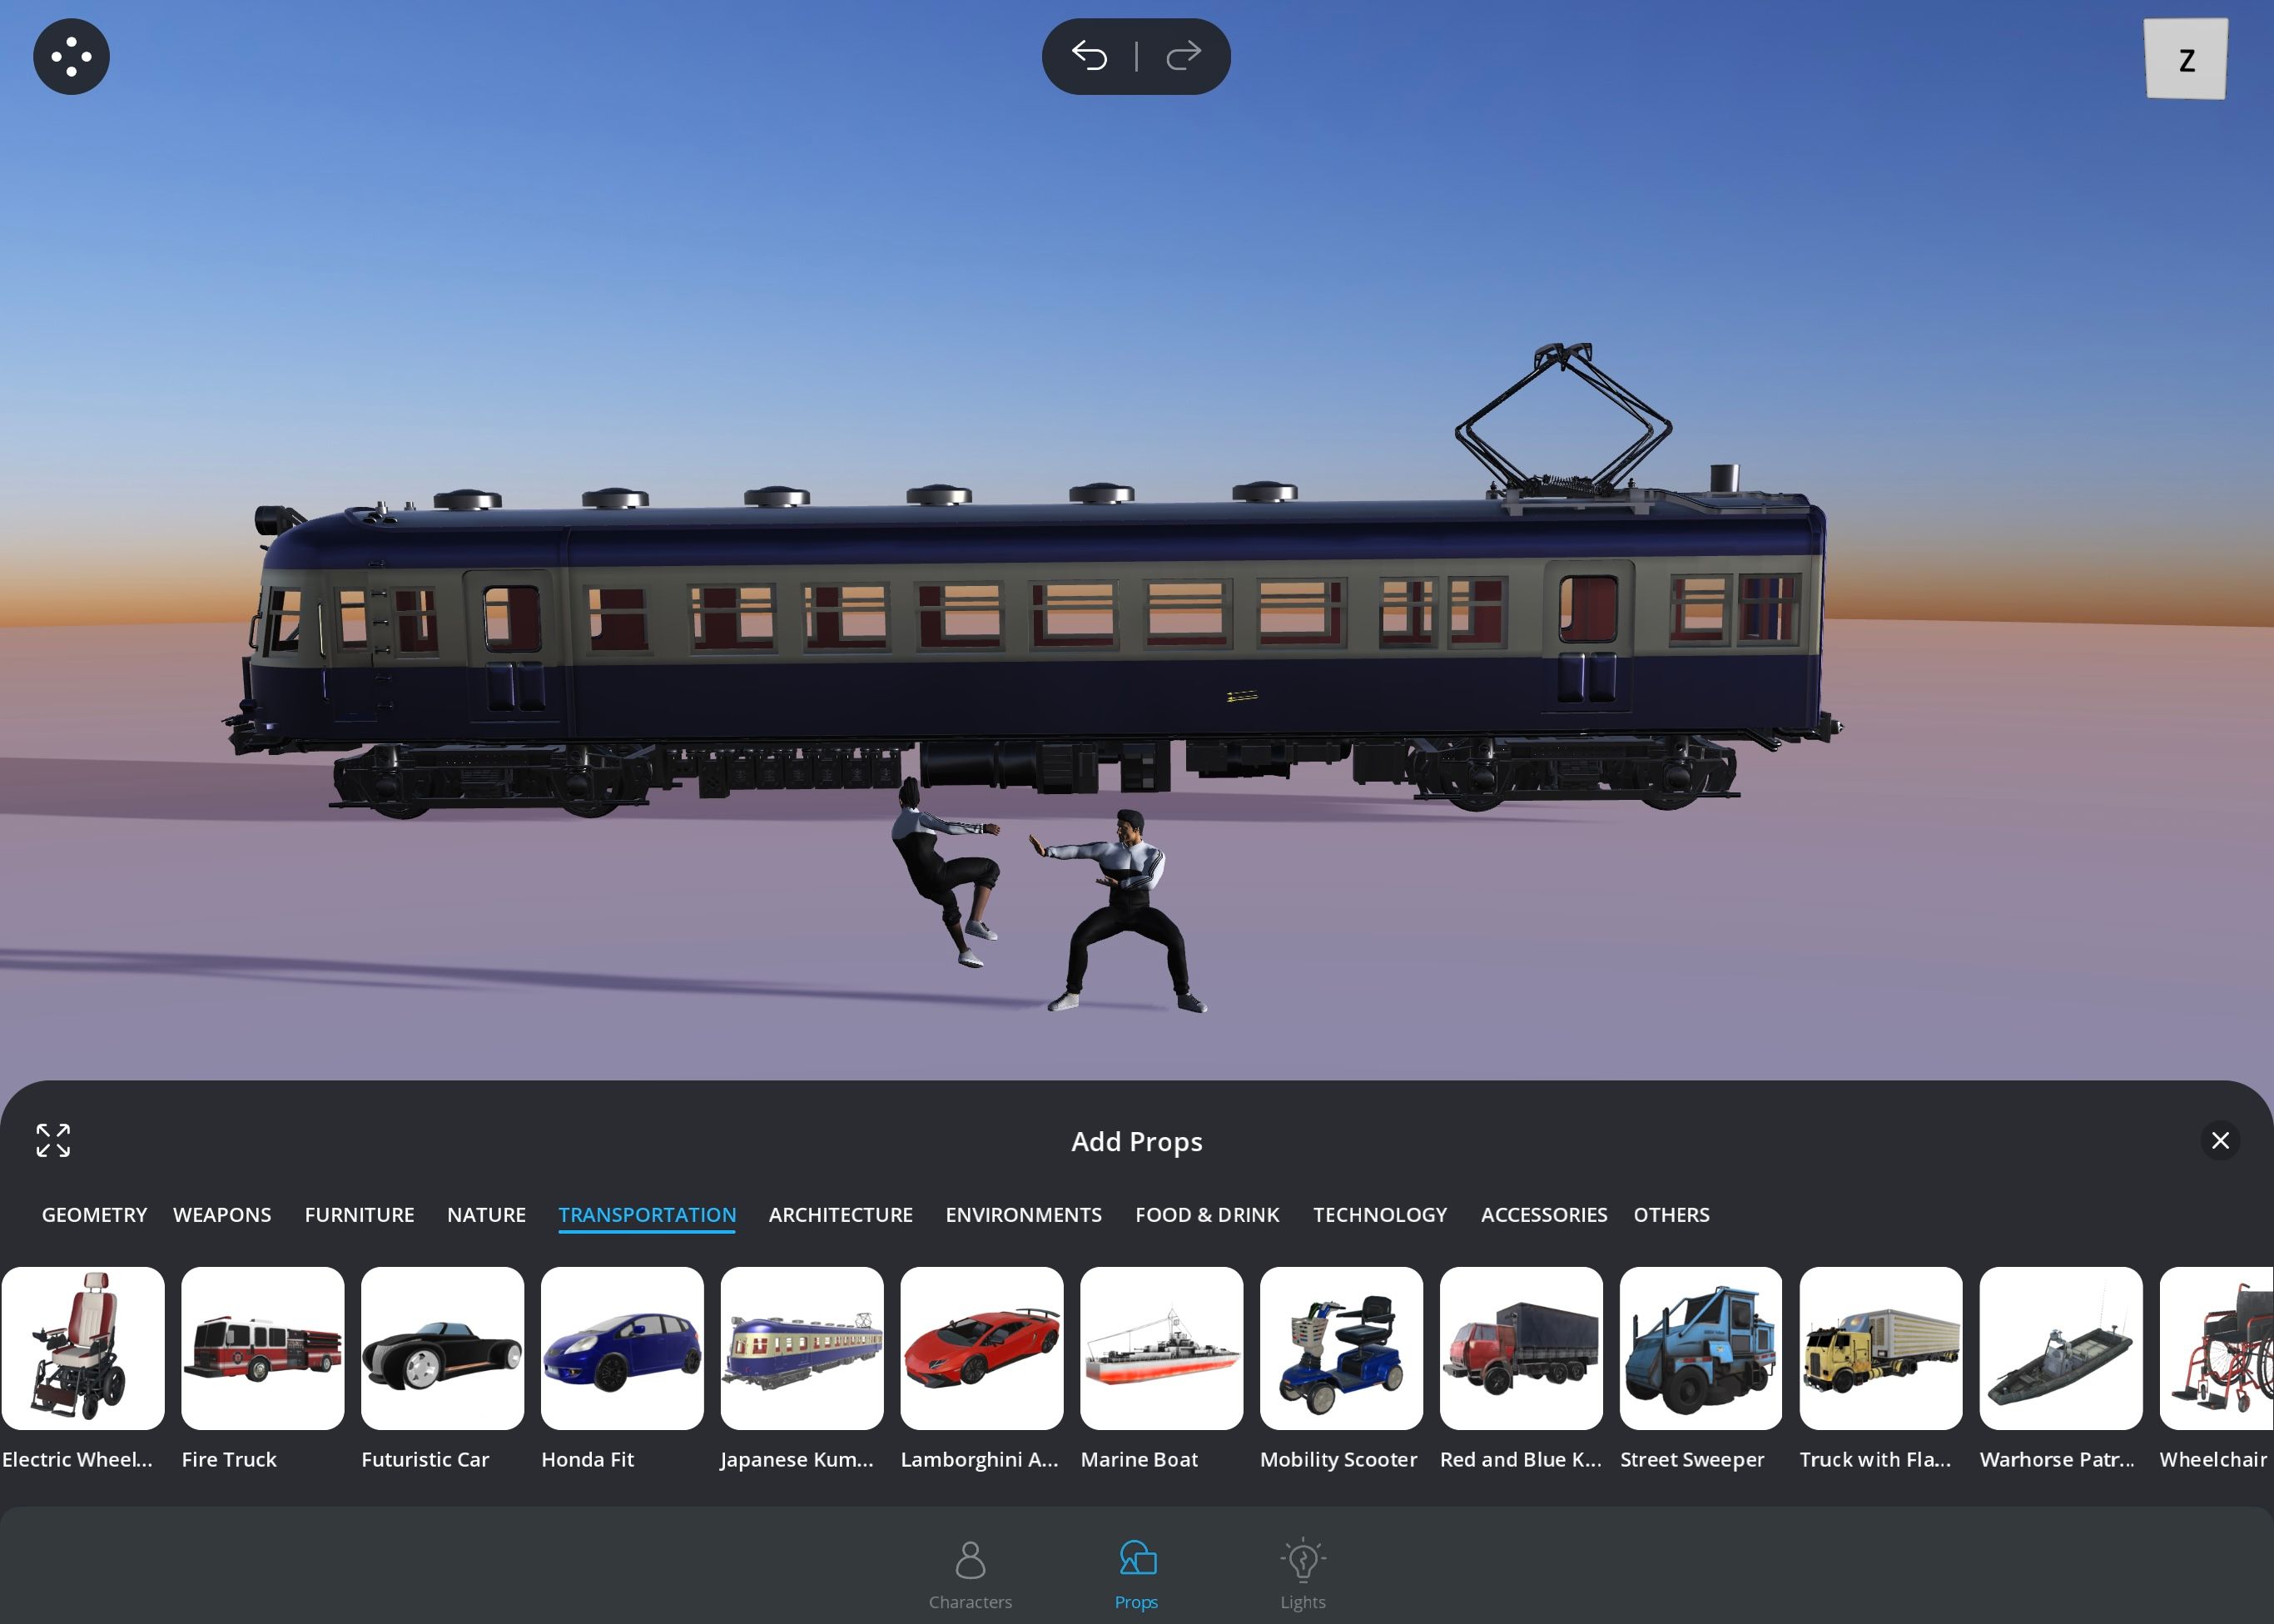 Scene of 3D man and woman fighting in front of a train with the Props menu on display